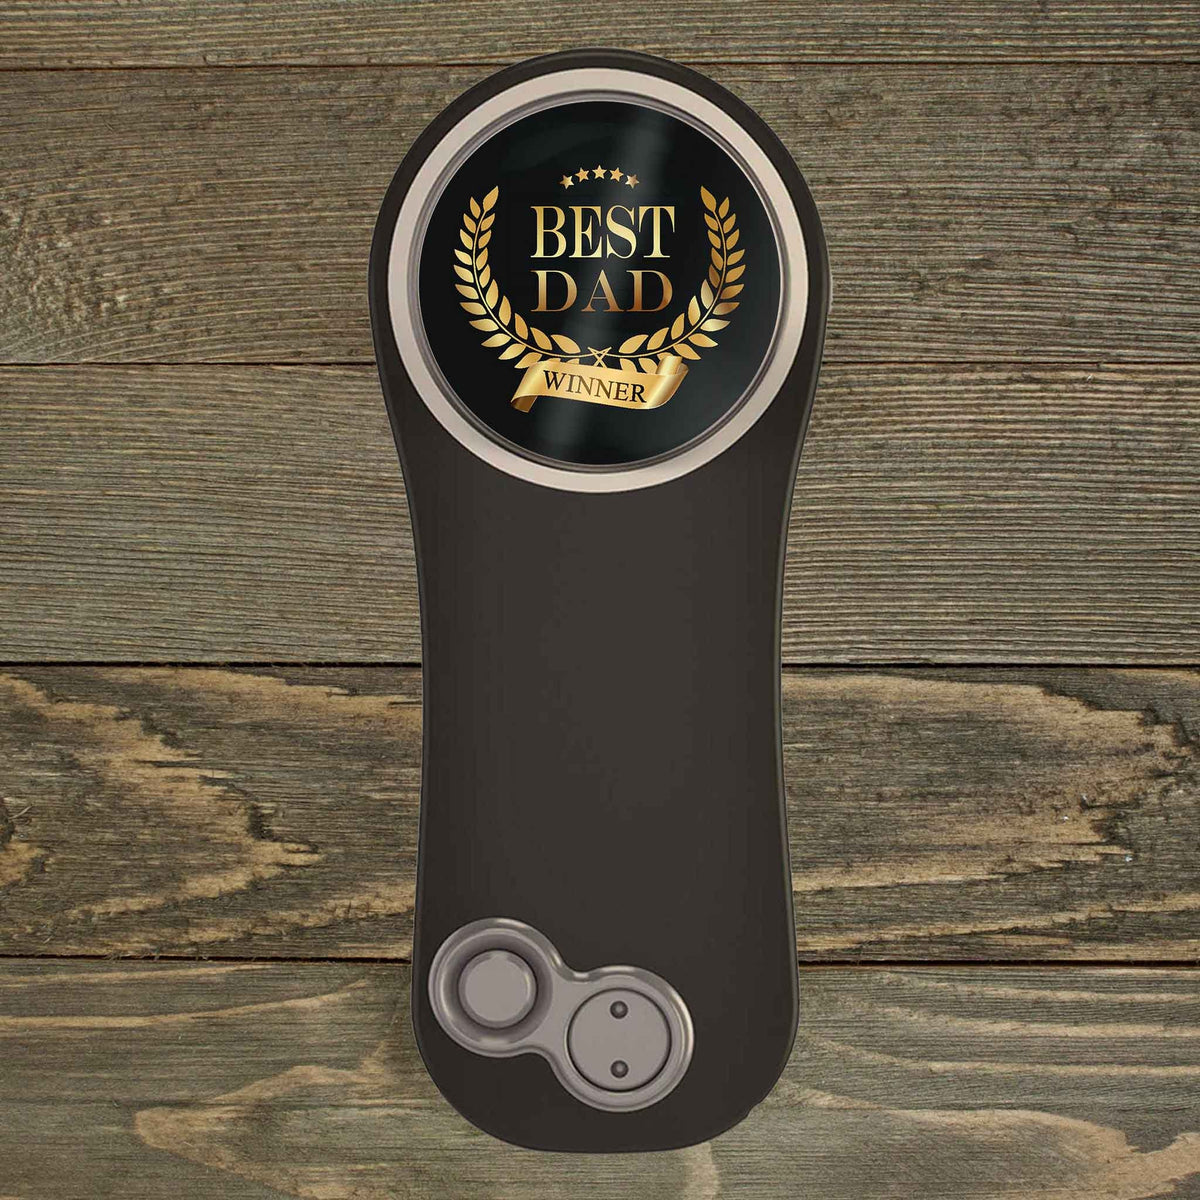 Personalized PitchFix Divot Tool | Golf Accessories | Golf Gifts | Happy Fathers Day